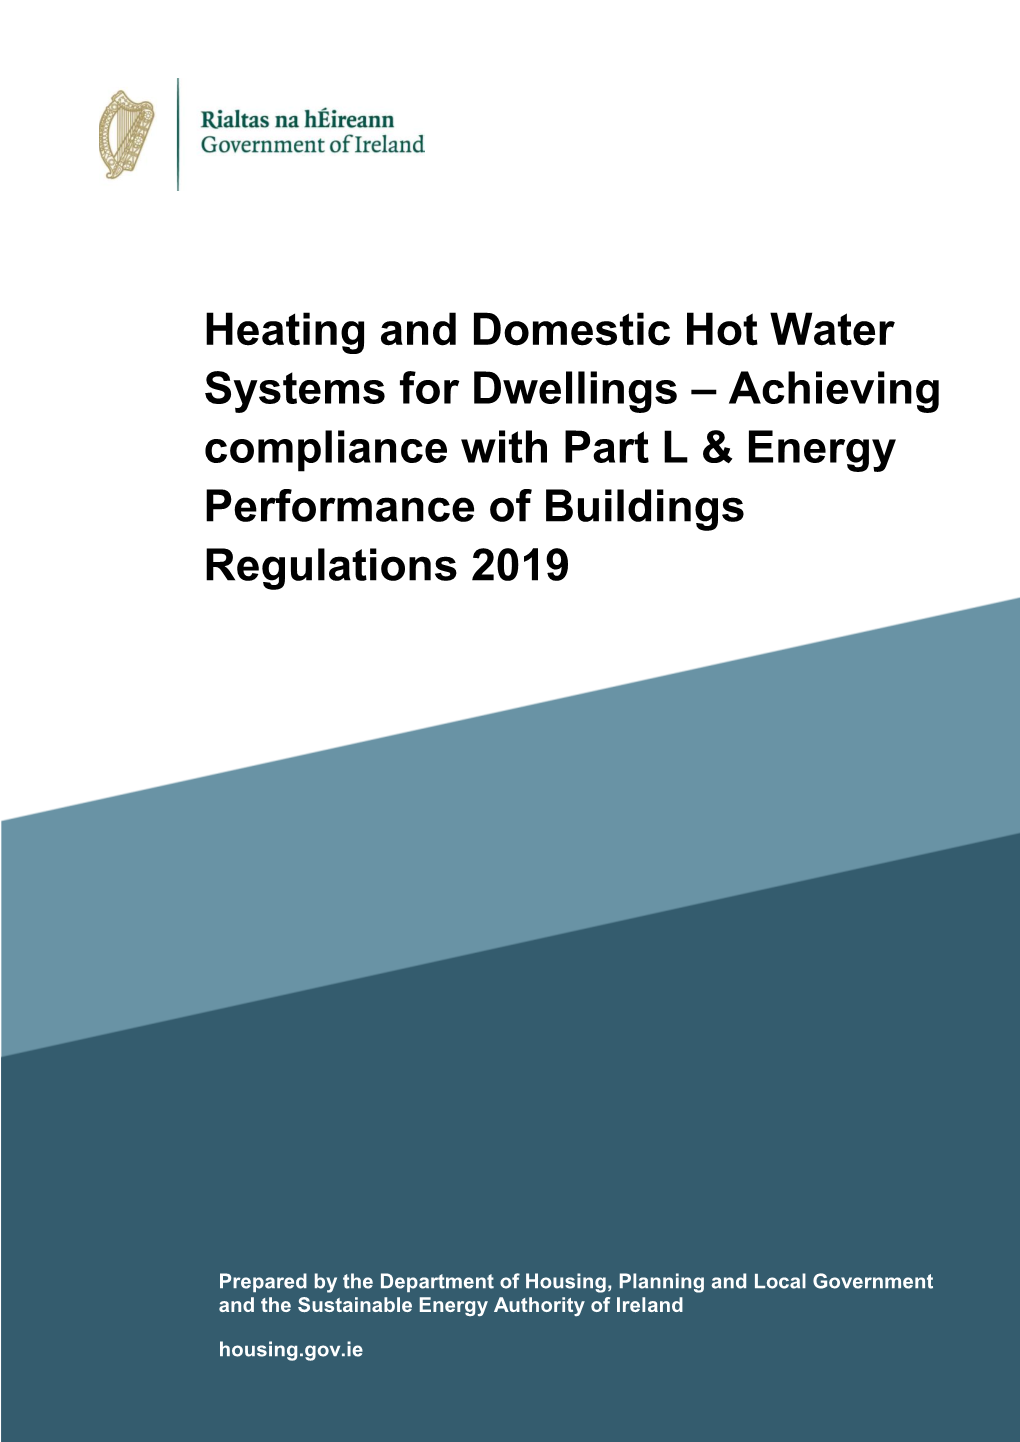 Heating & Domestic Hot Water Systems for Dwellings